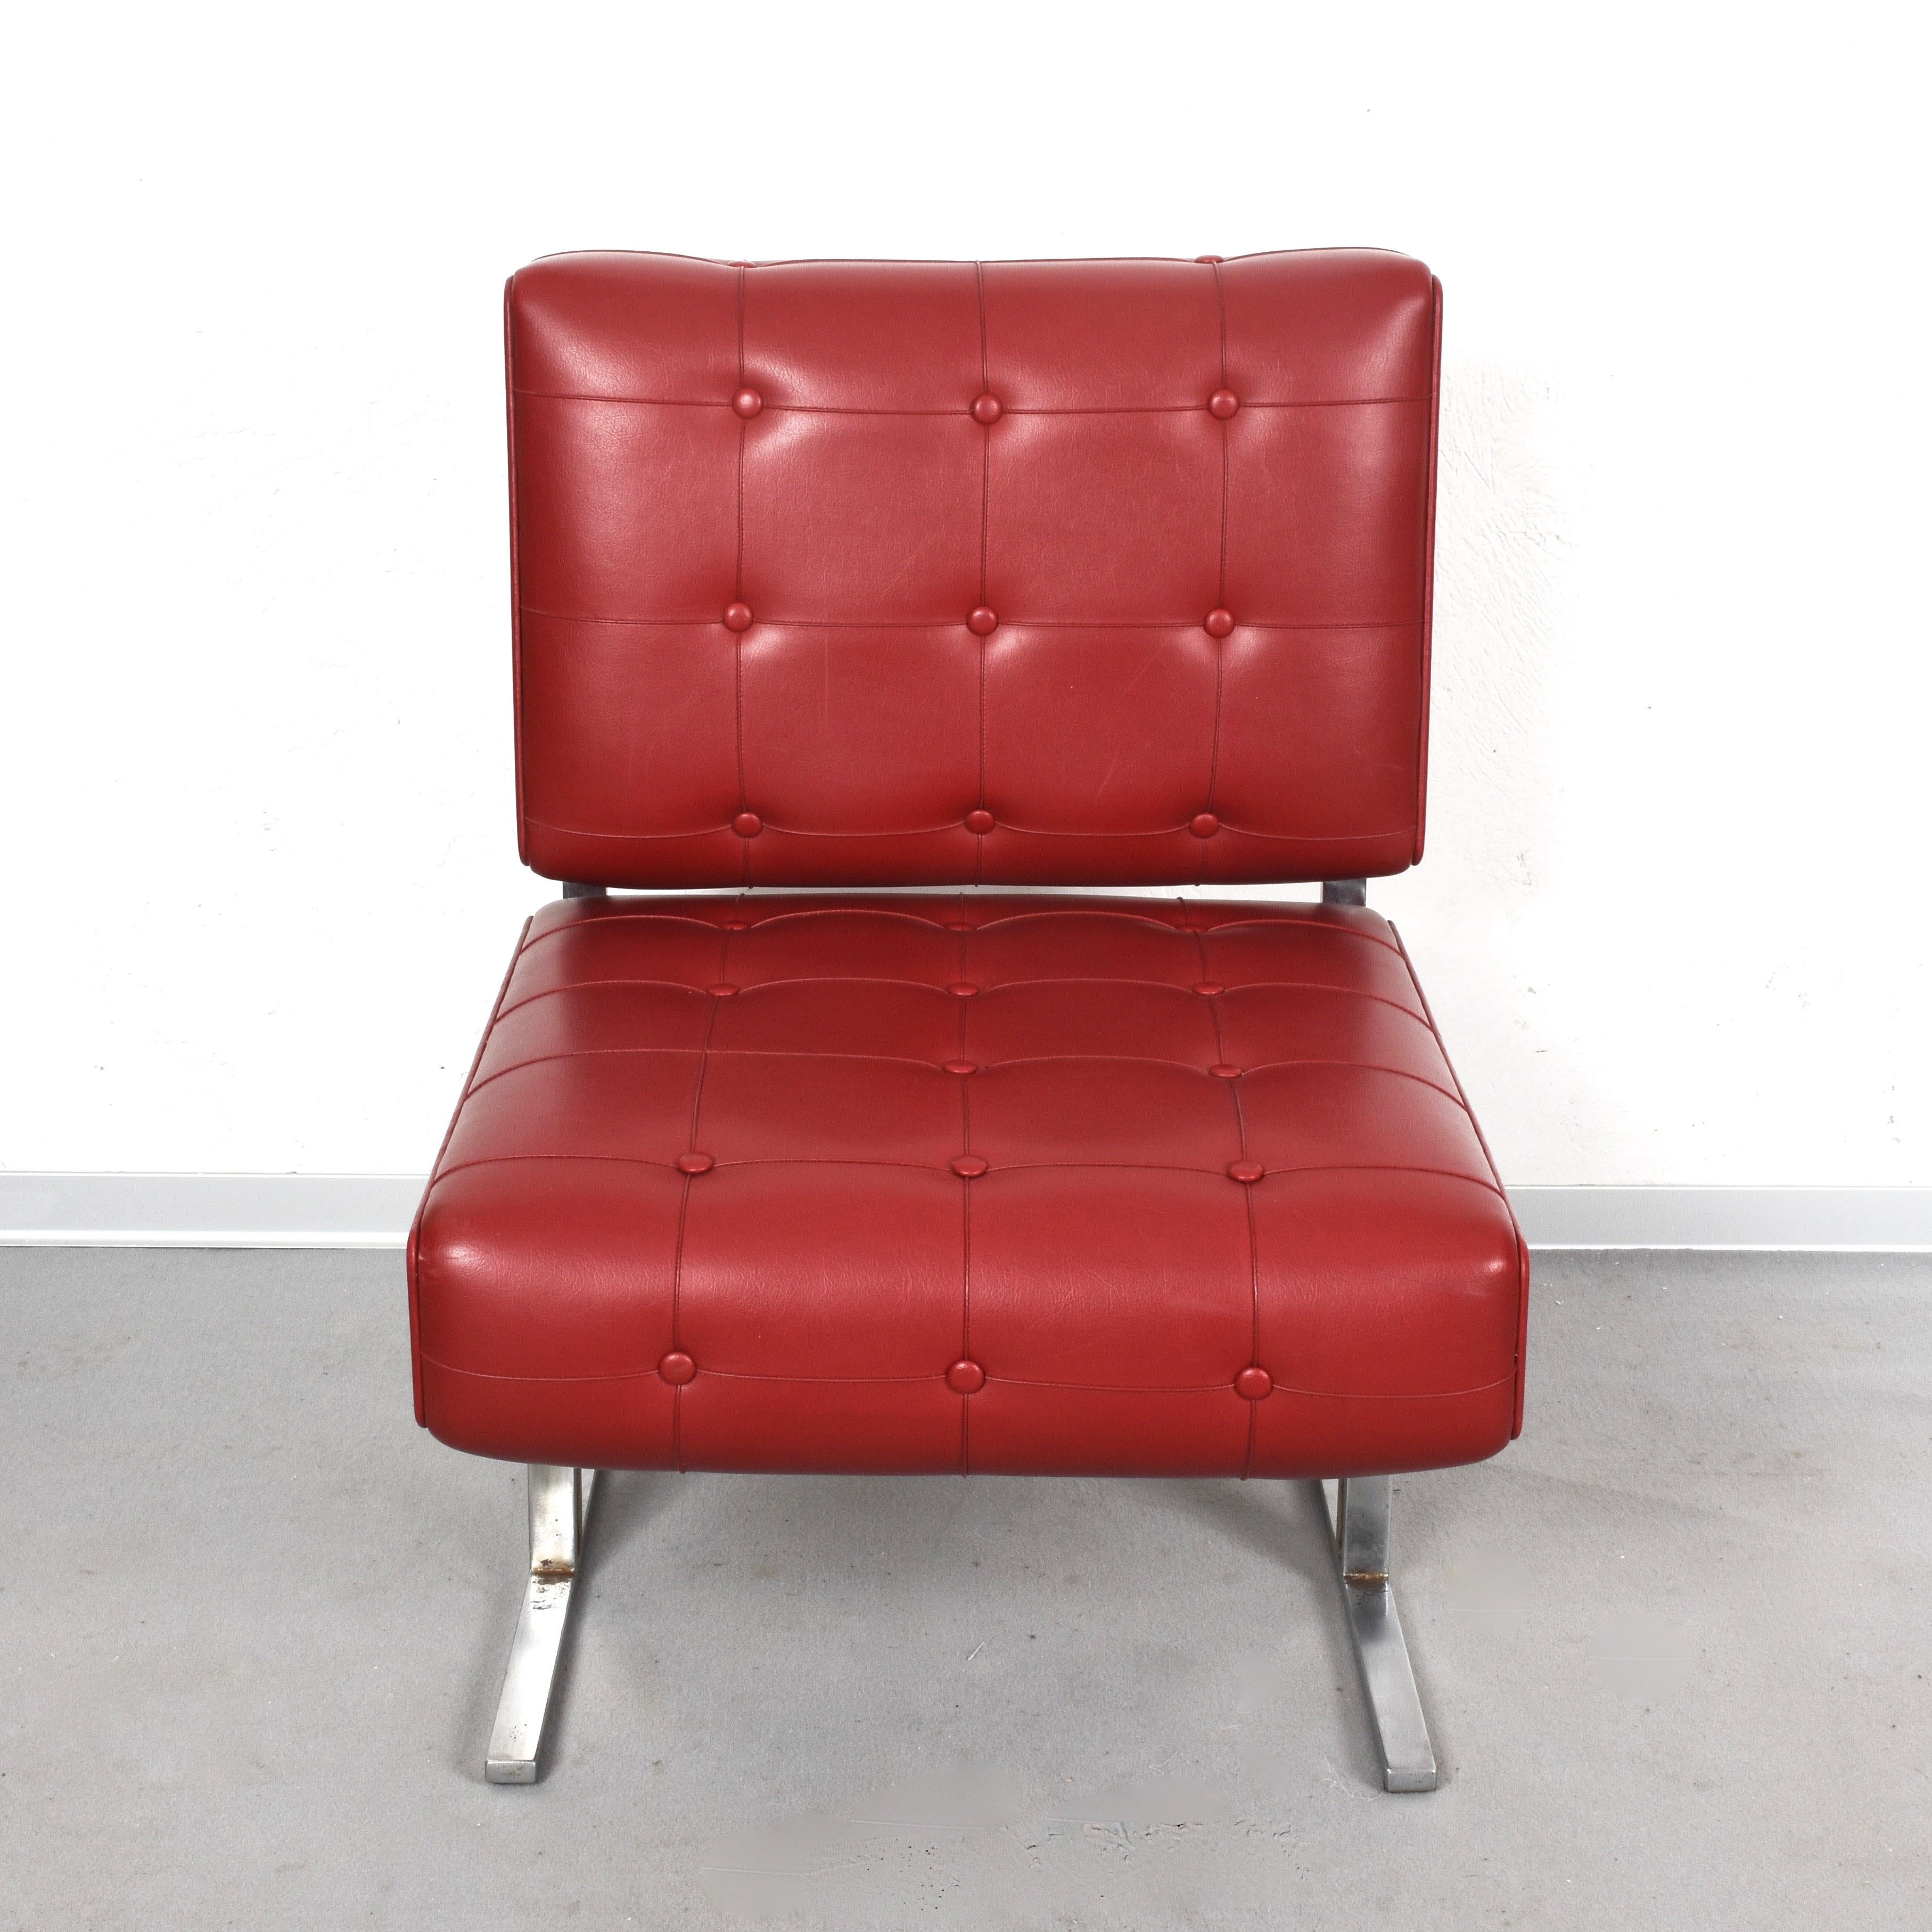 Pair of Steel and Red Faux Leather Armchairs Skay after Hausmann De Sede, 1950s For Sale 11